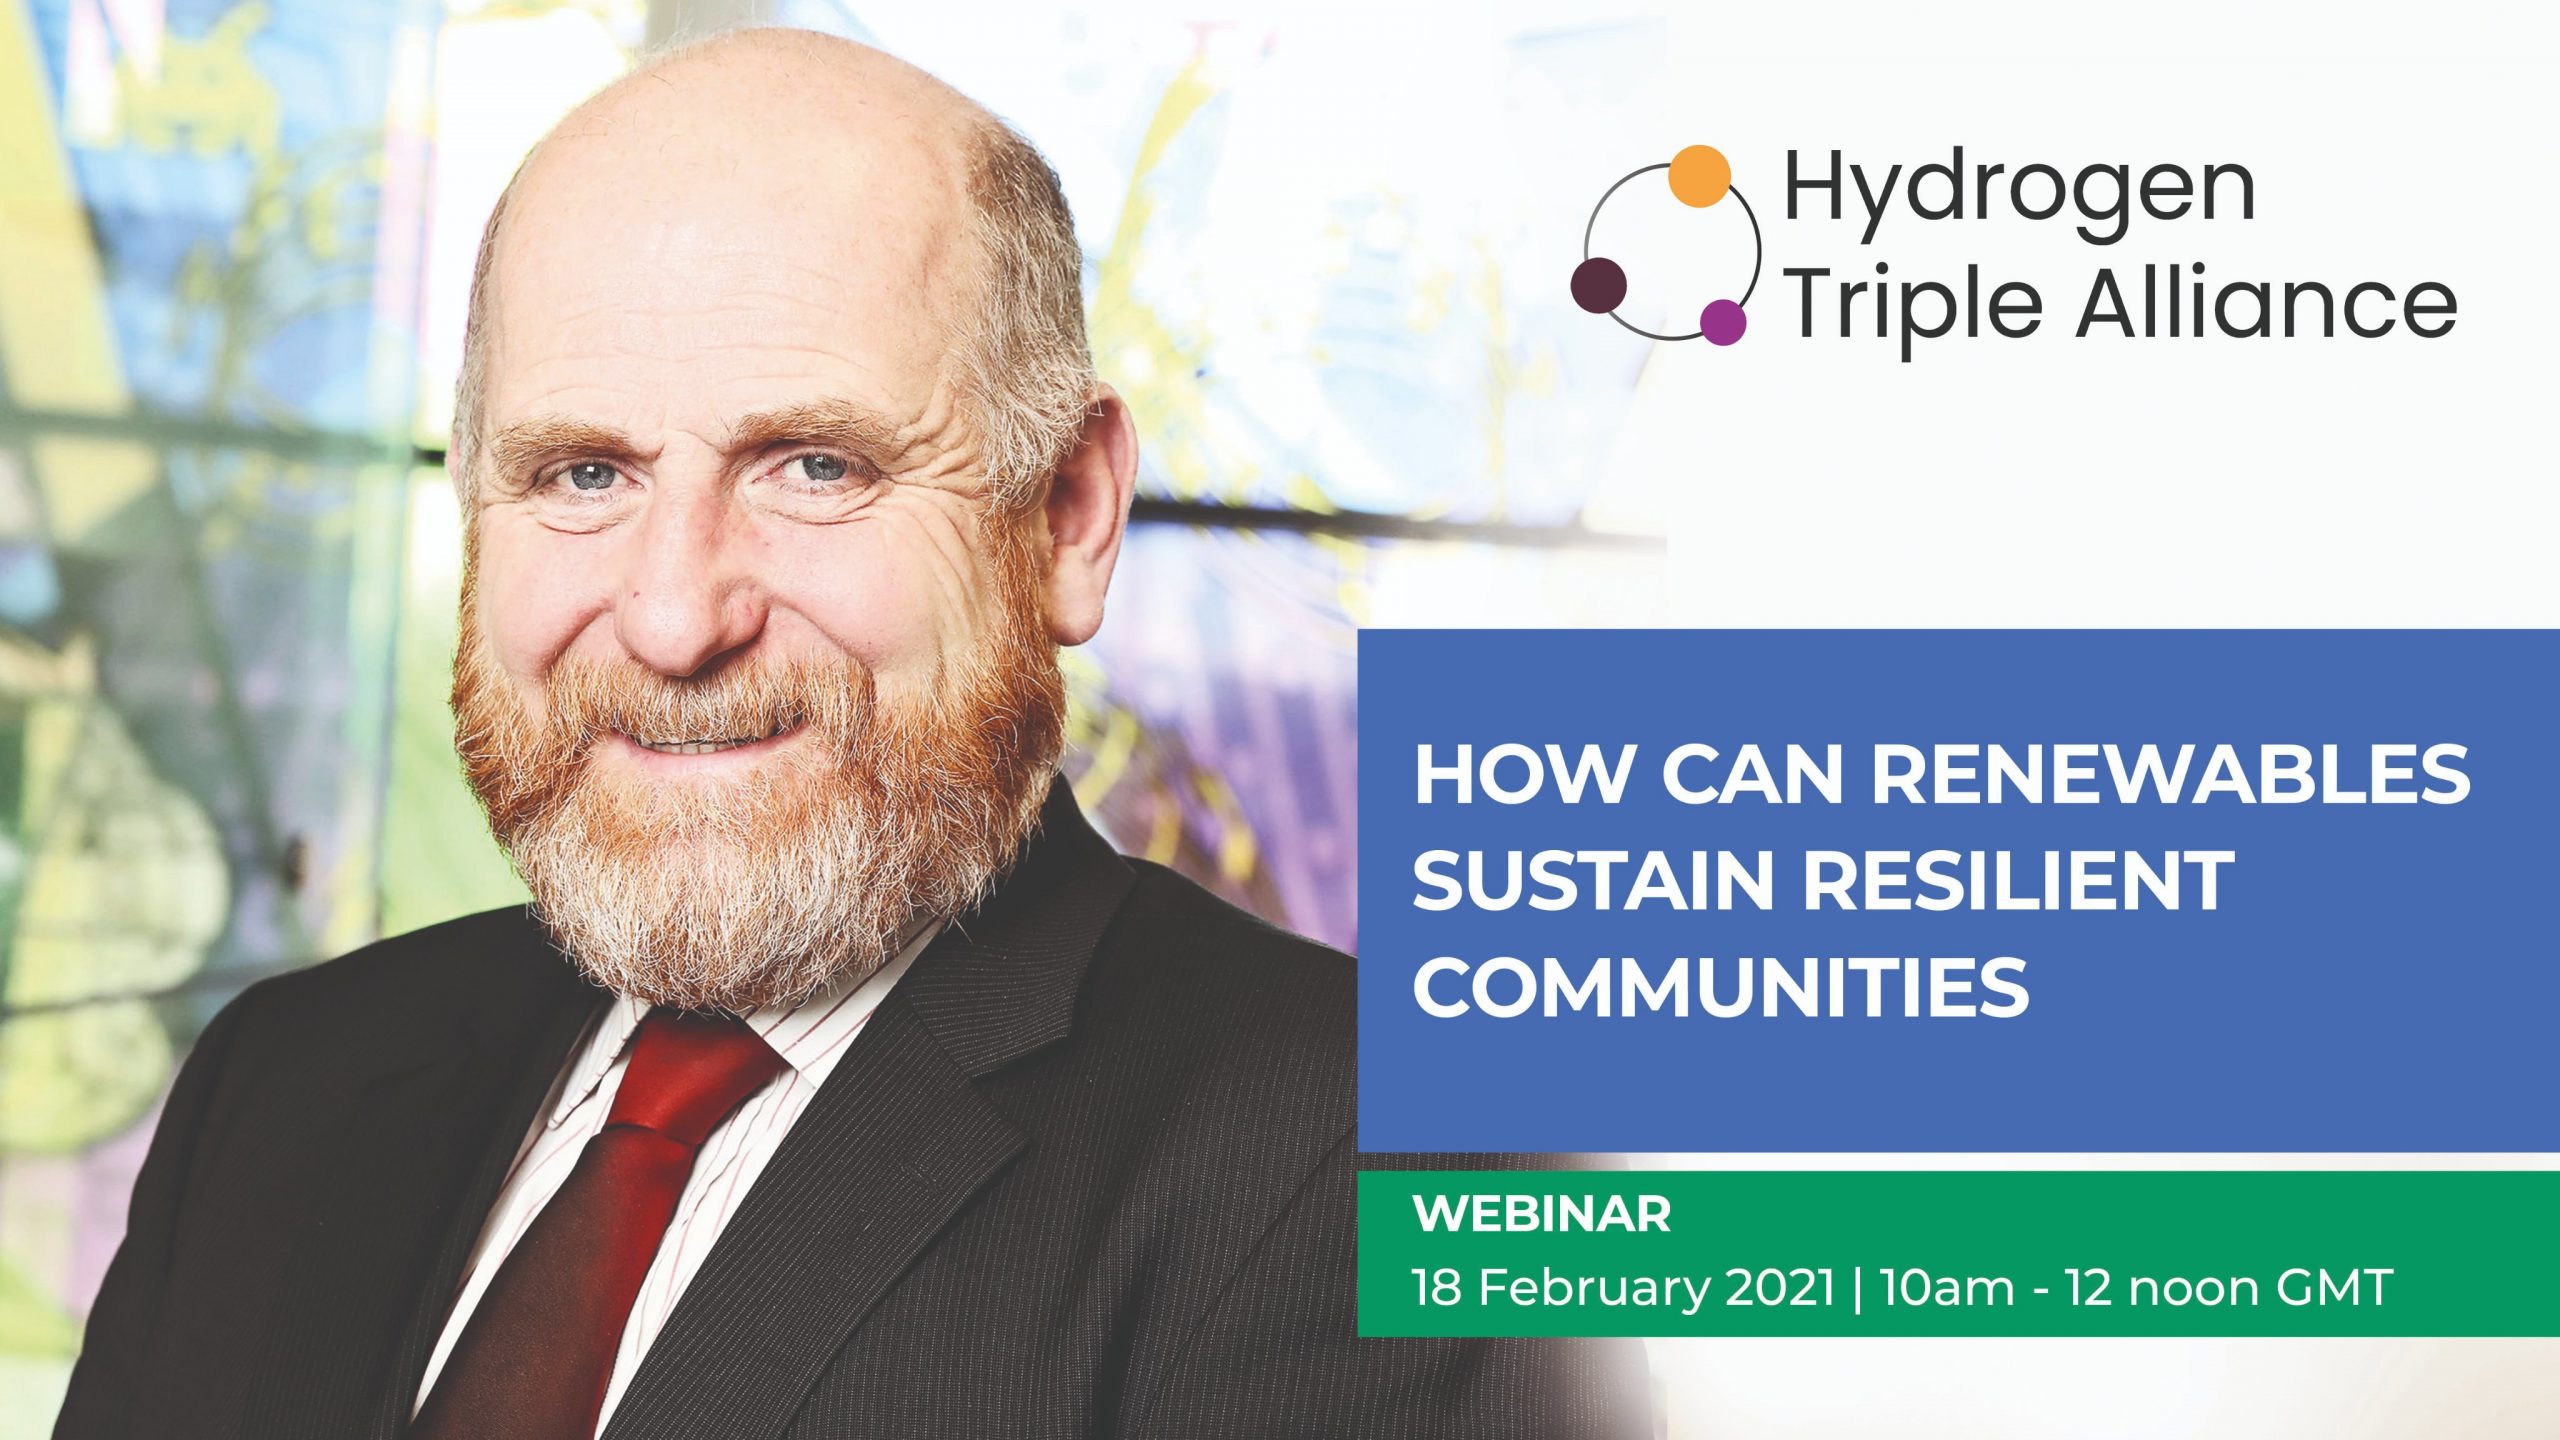 Webinar Slides Now Available from The Hydrogen Triple Alliance’s Inaugural Event!